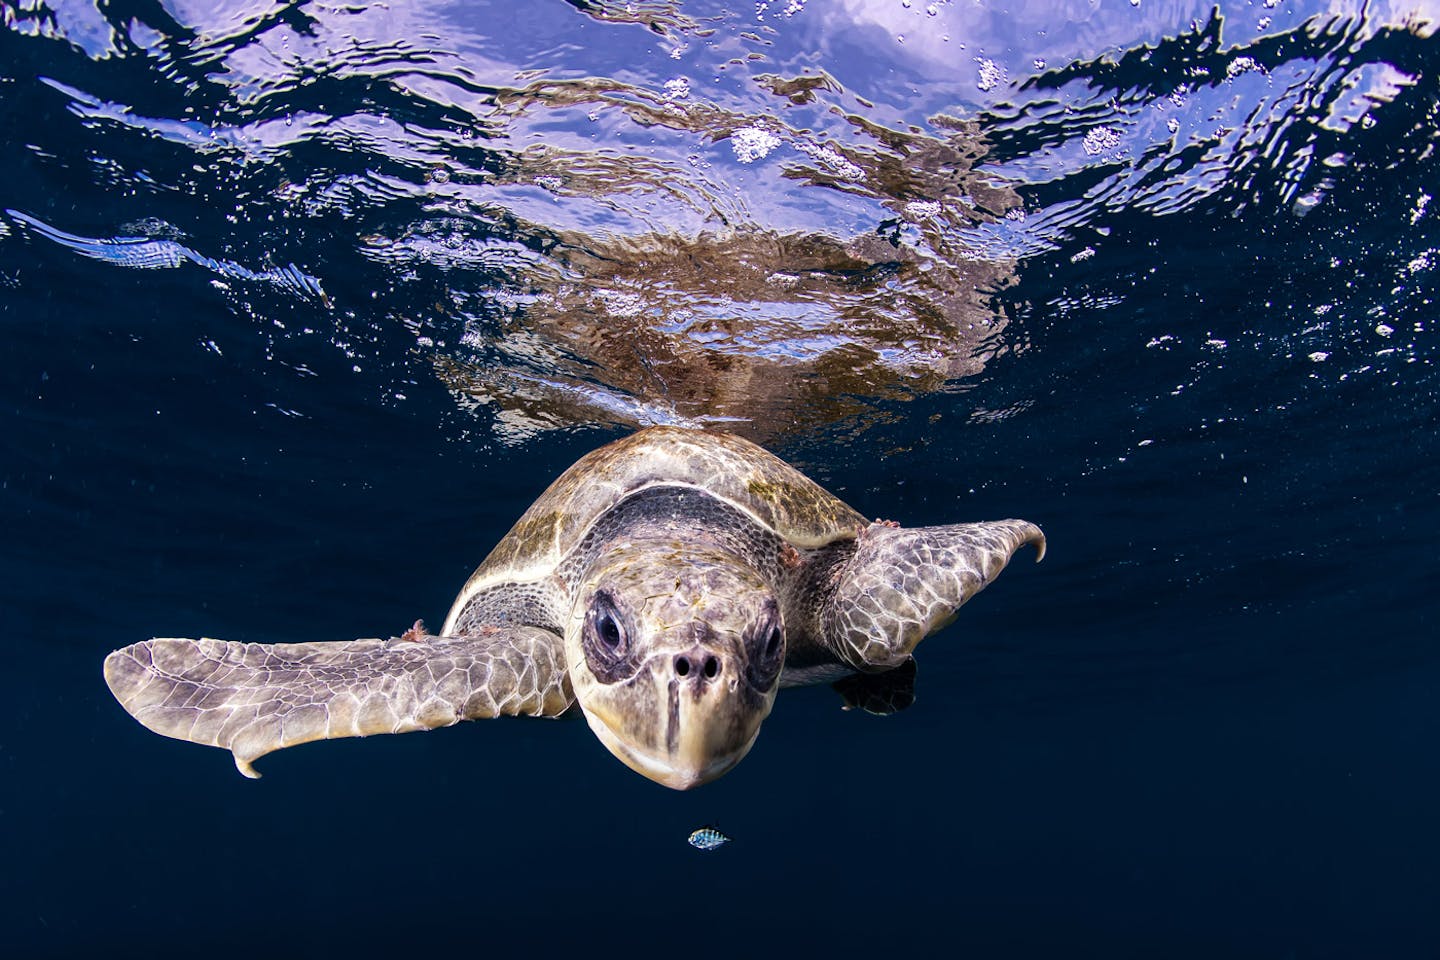 Rare sea turtles are setting new nesting records throughout the Southeast